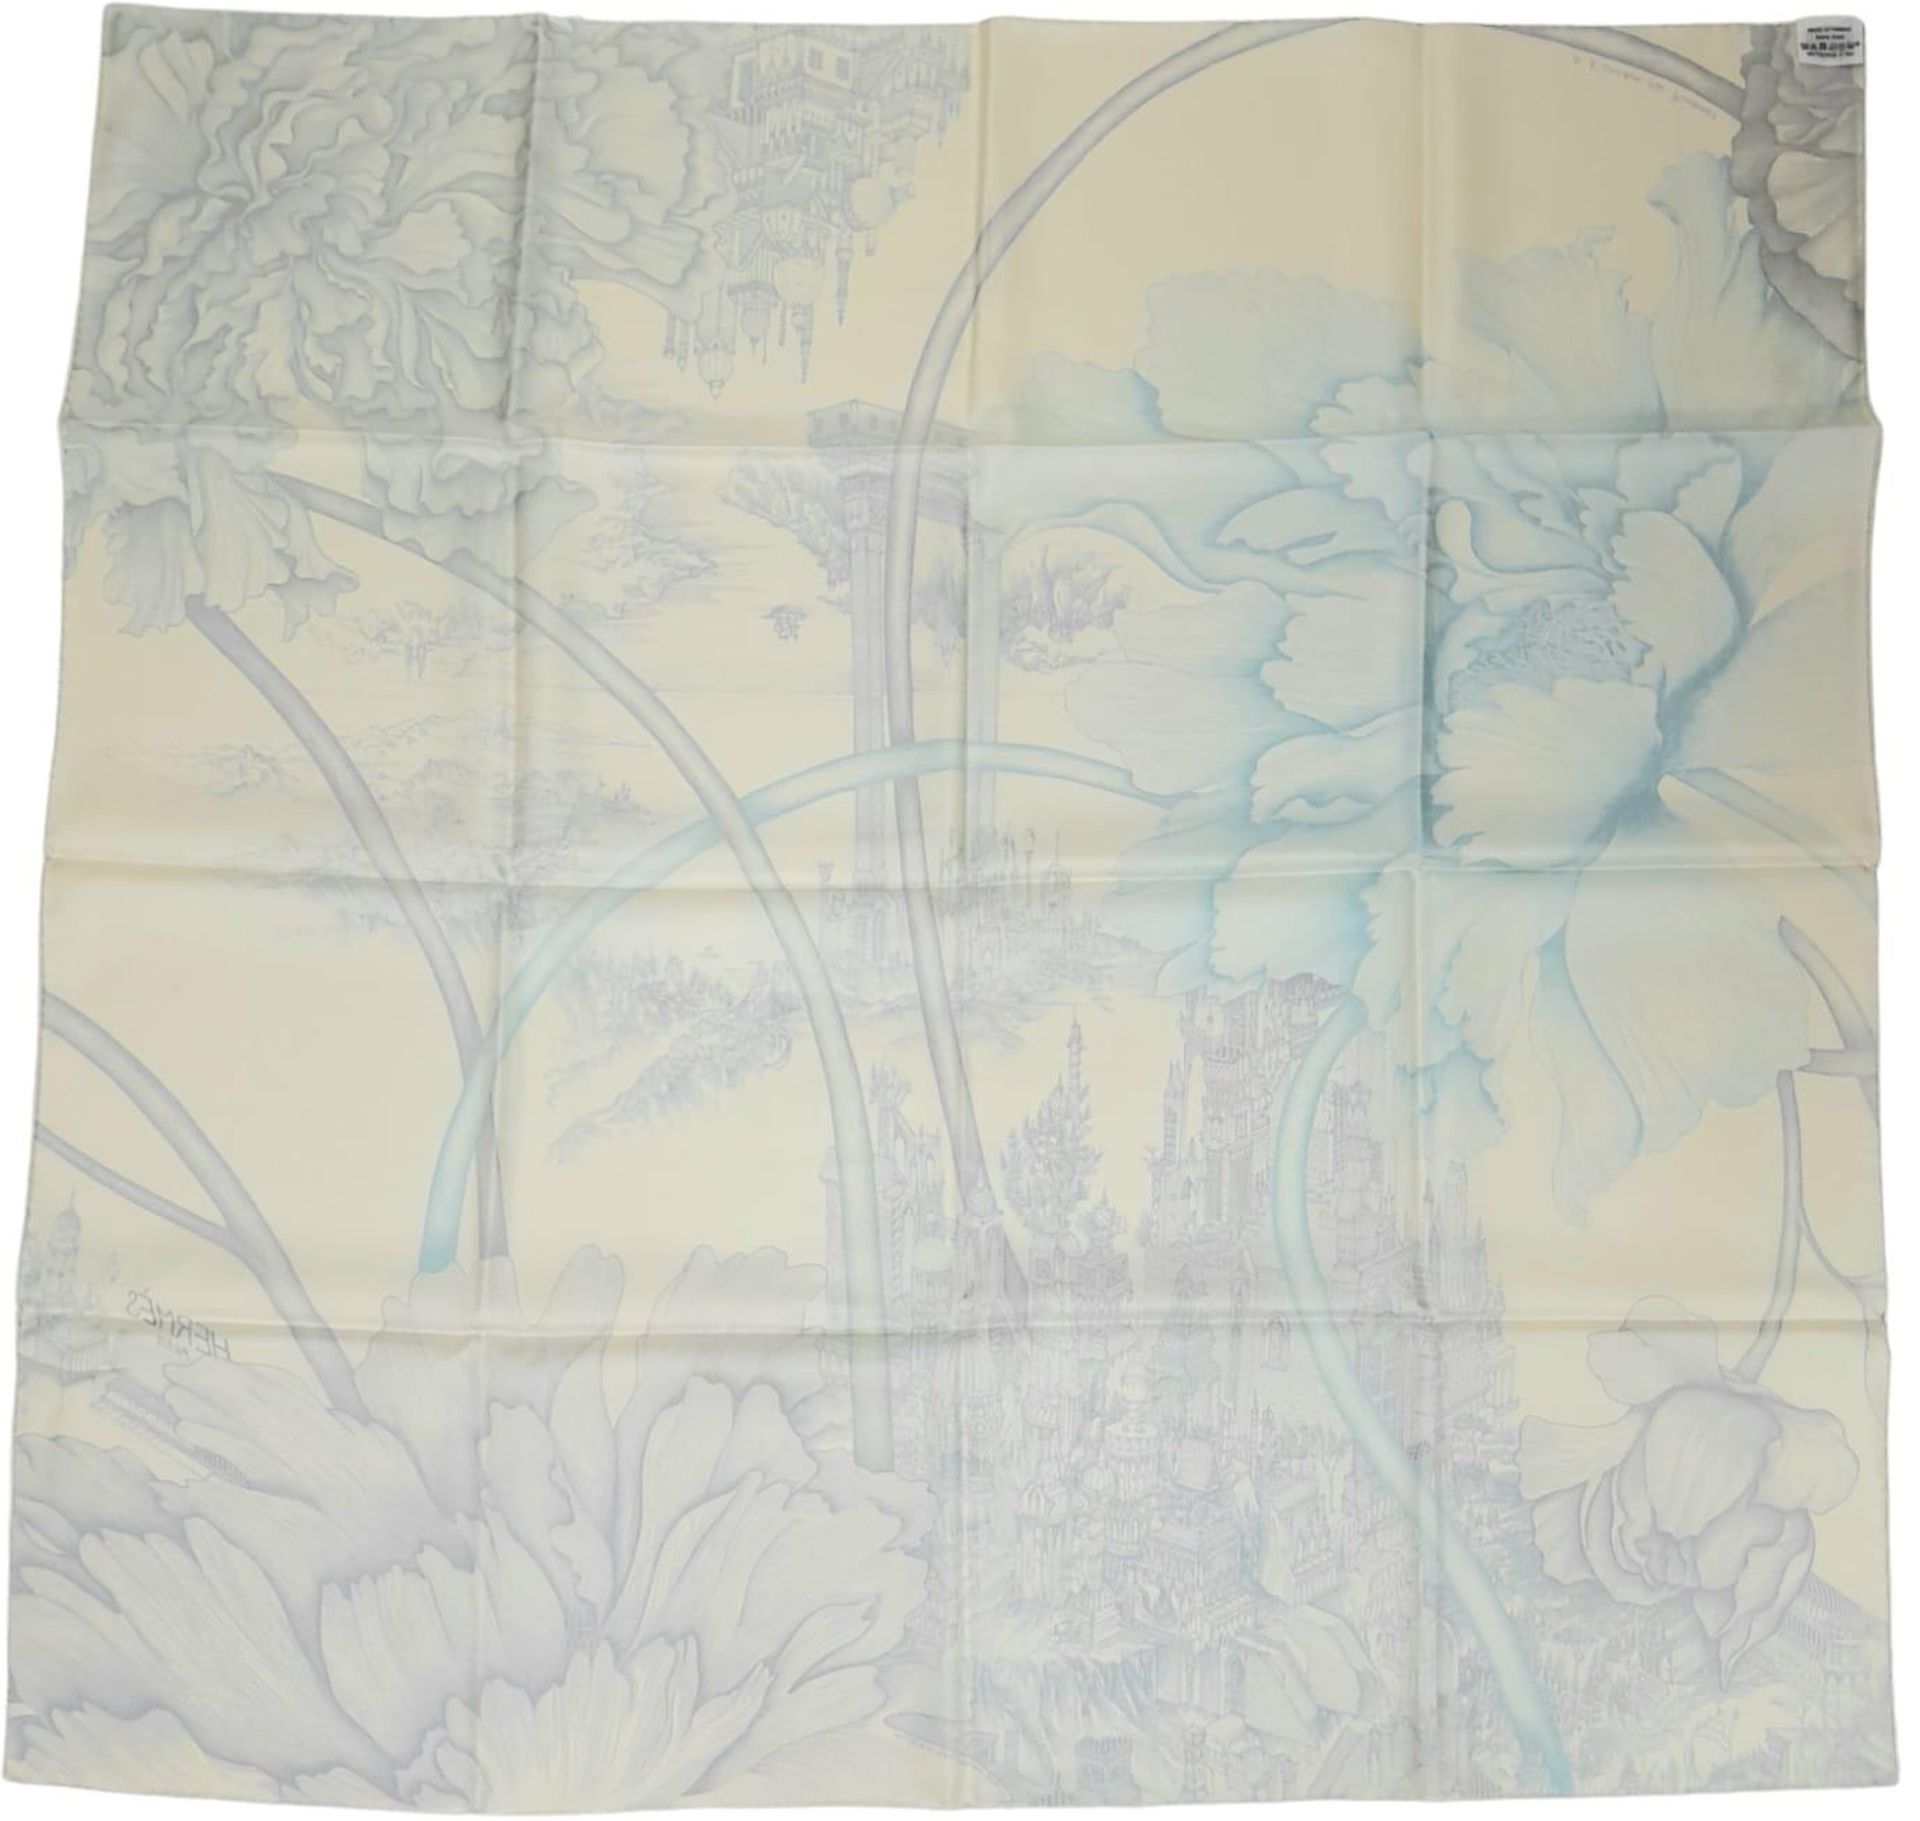 A Hermes Silk Scarf in Original Hermes Box. 88x 88cm. In good condition. Ref: 15539 - Image 2 of 4